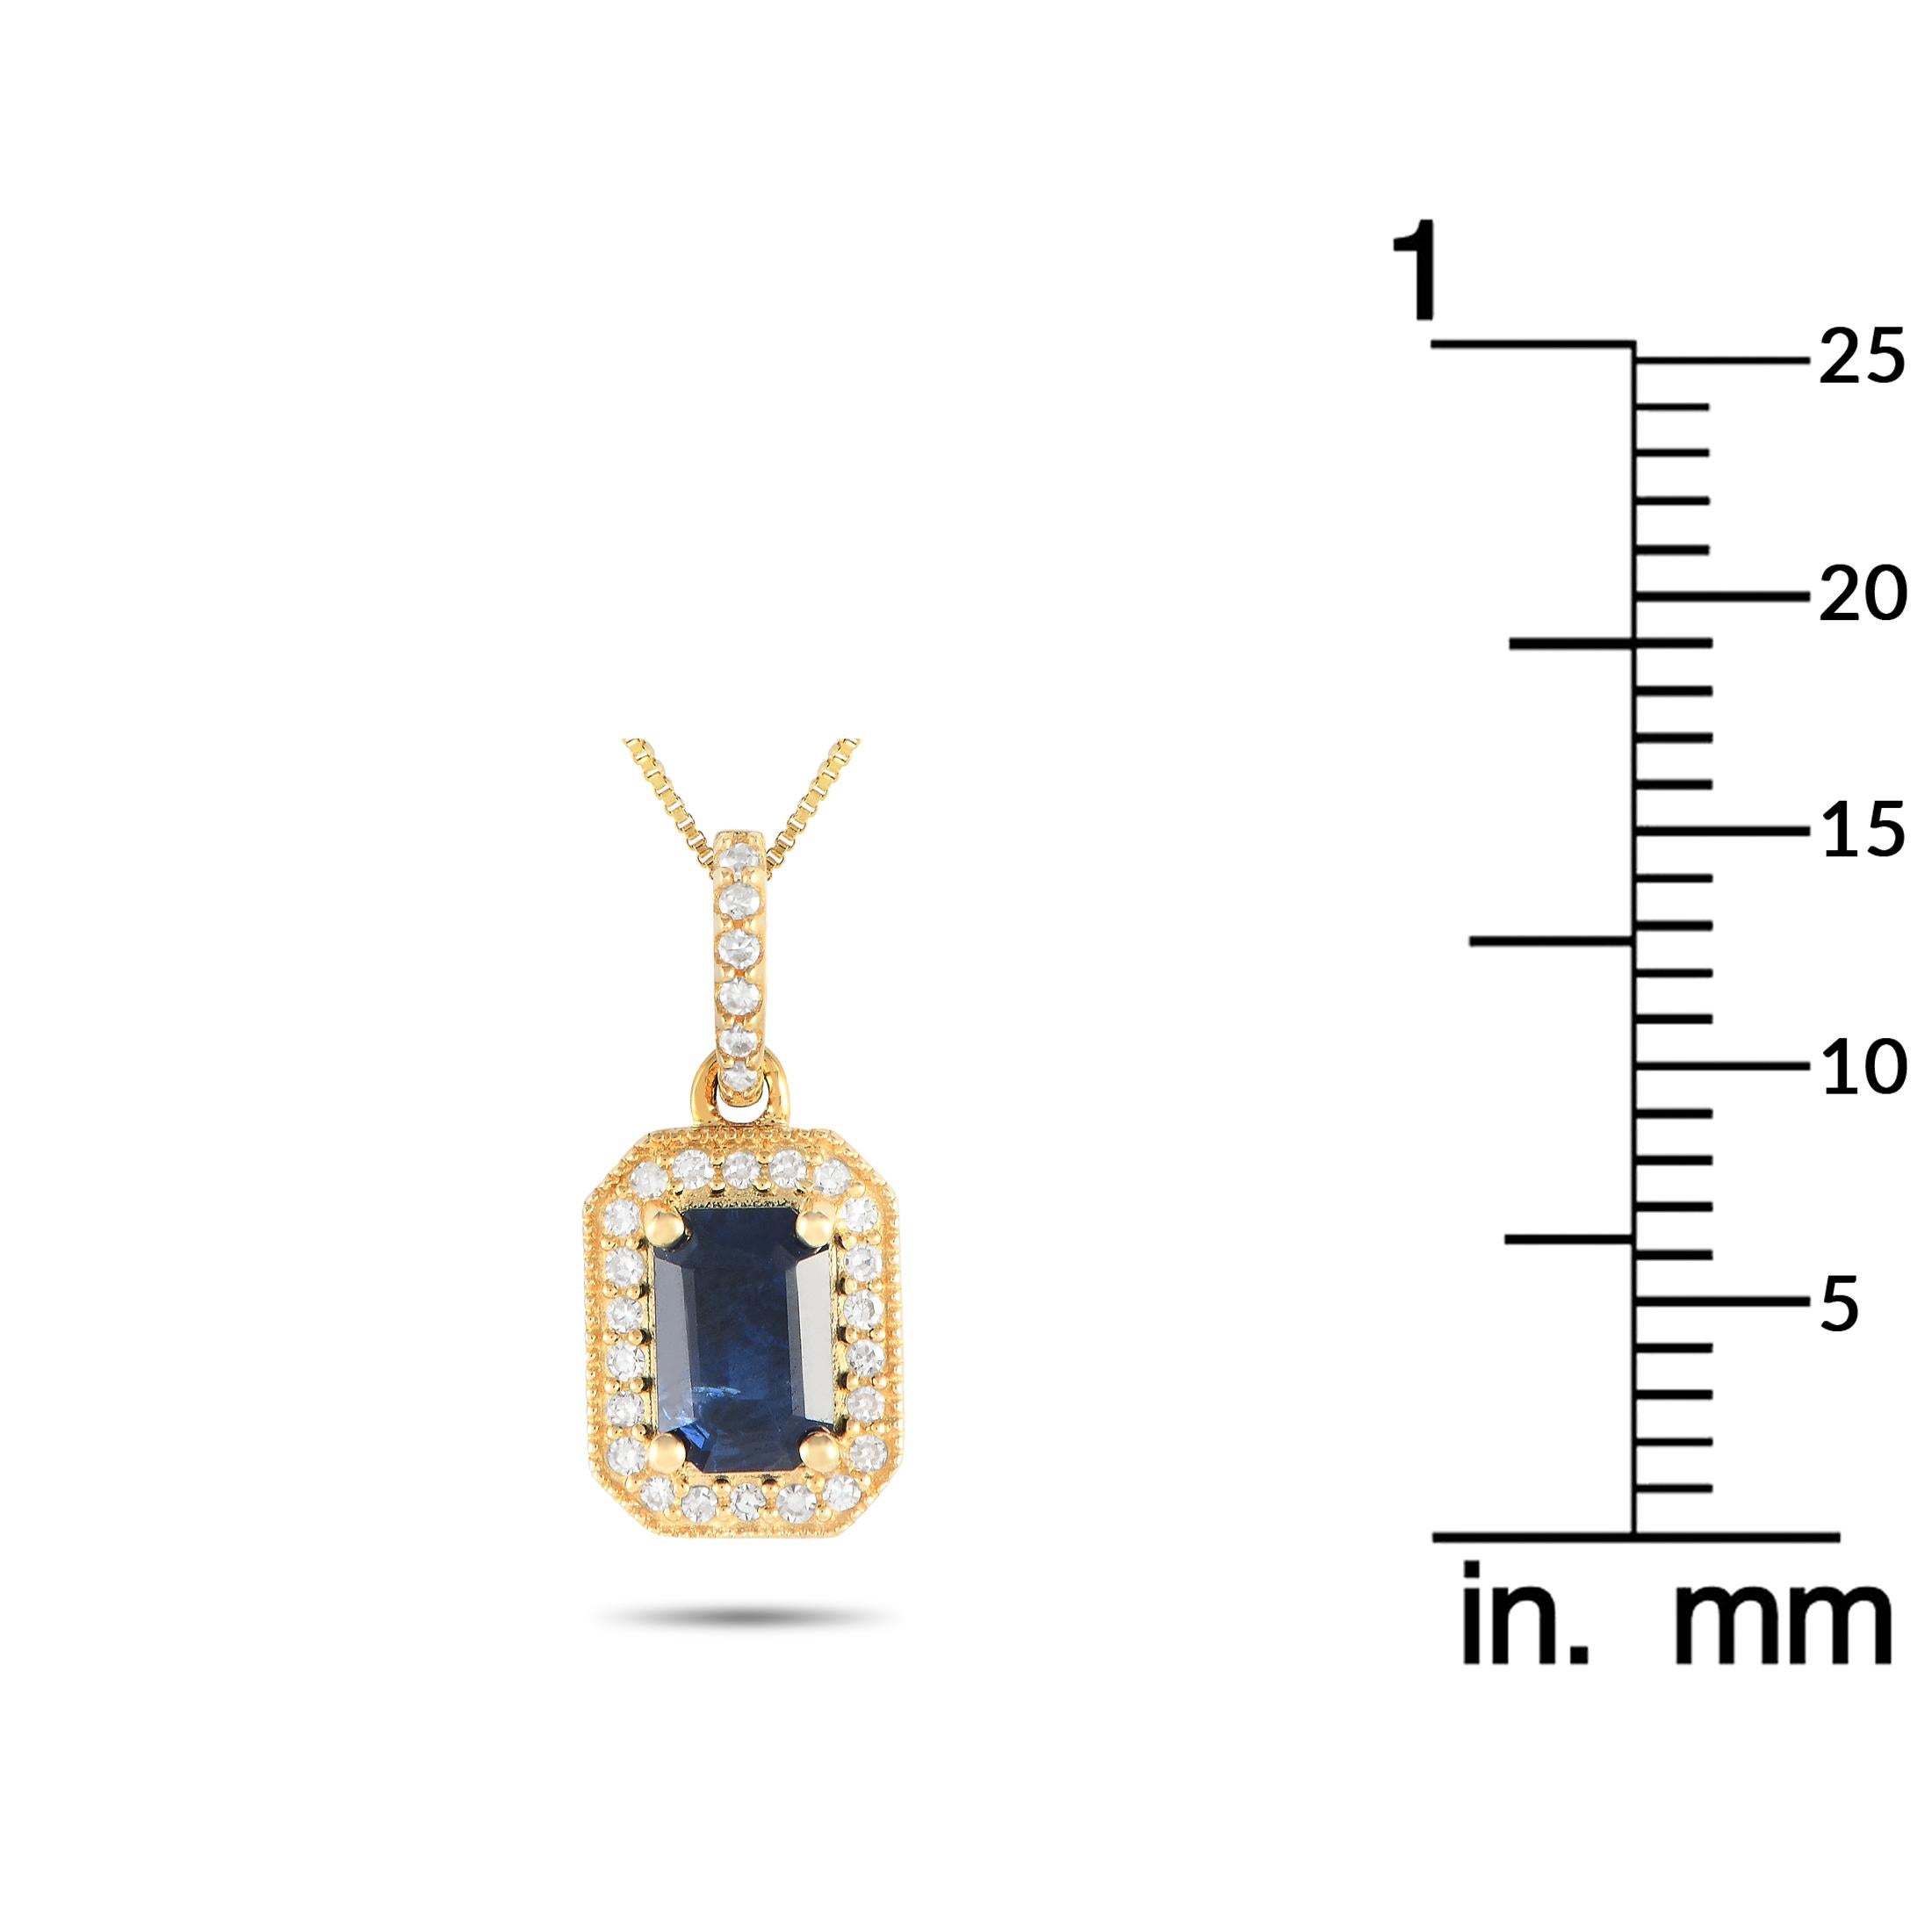 LB Exclusive 14K Yellow Gold 0.10ct Diamond Pendant Necklace PD4-16050YSA In New Condition For Sale In Southampton, PA